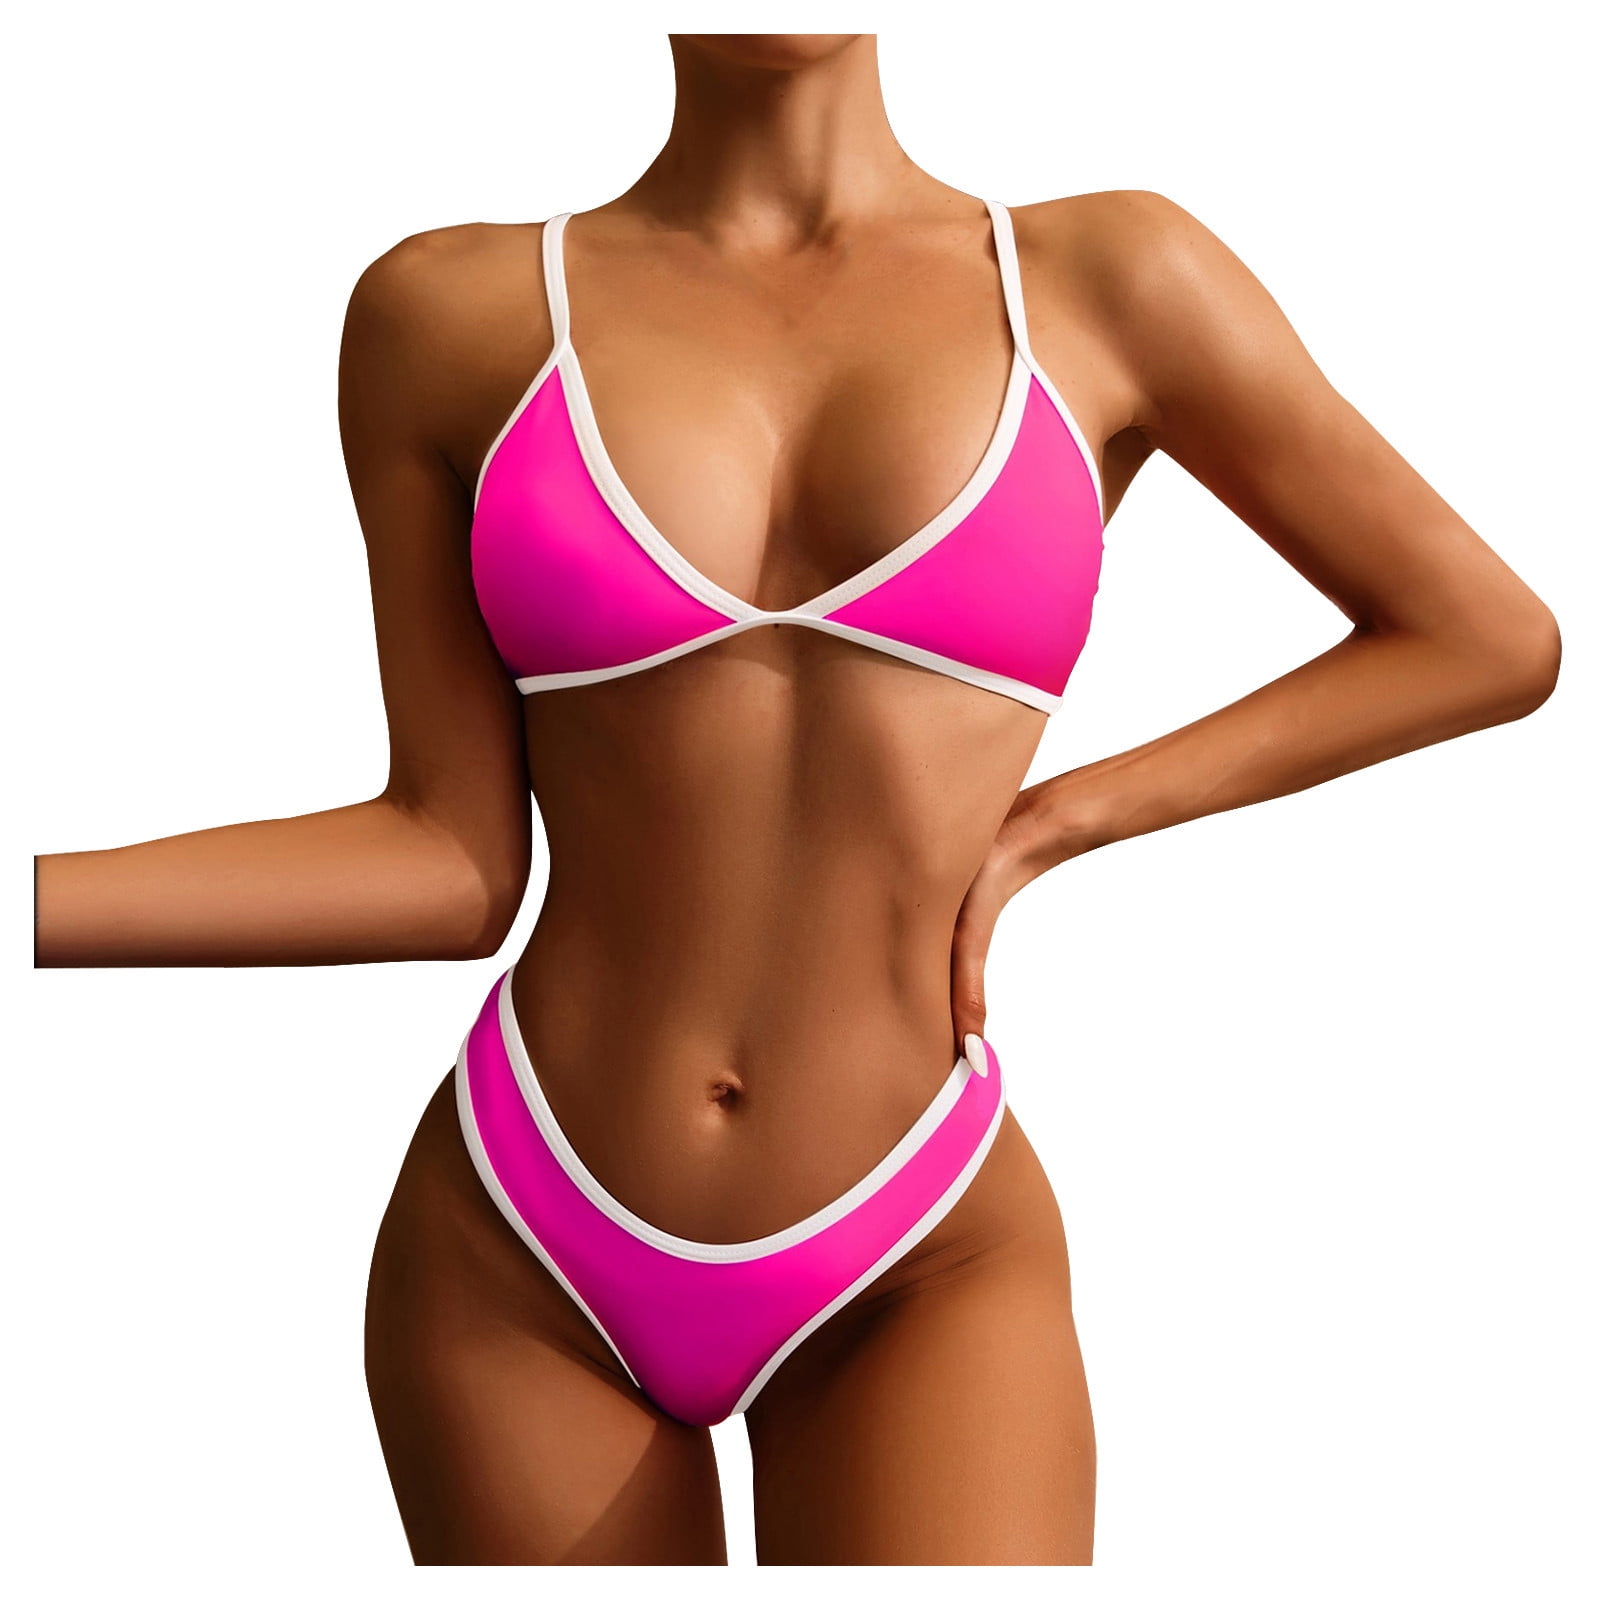 JGGSPWM Womens High Waist Two Pieces Bikini Set Color Block Striped  Swimsuit Adjustable Bathing Suit Wireless Paded Tops and Panties Hot Pink L